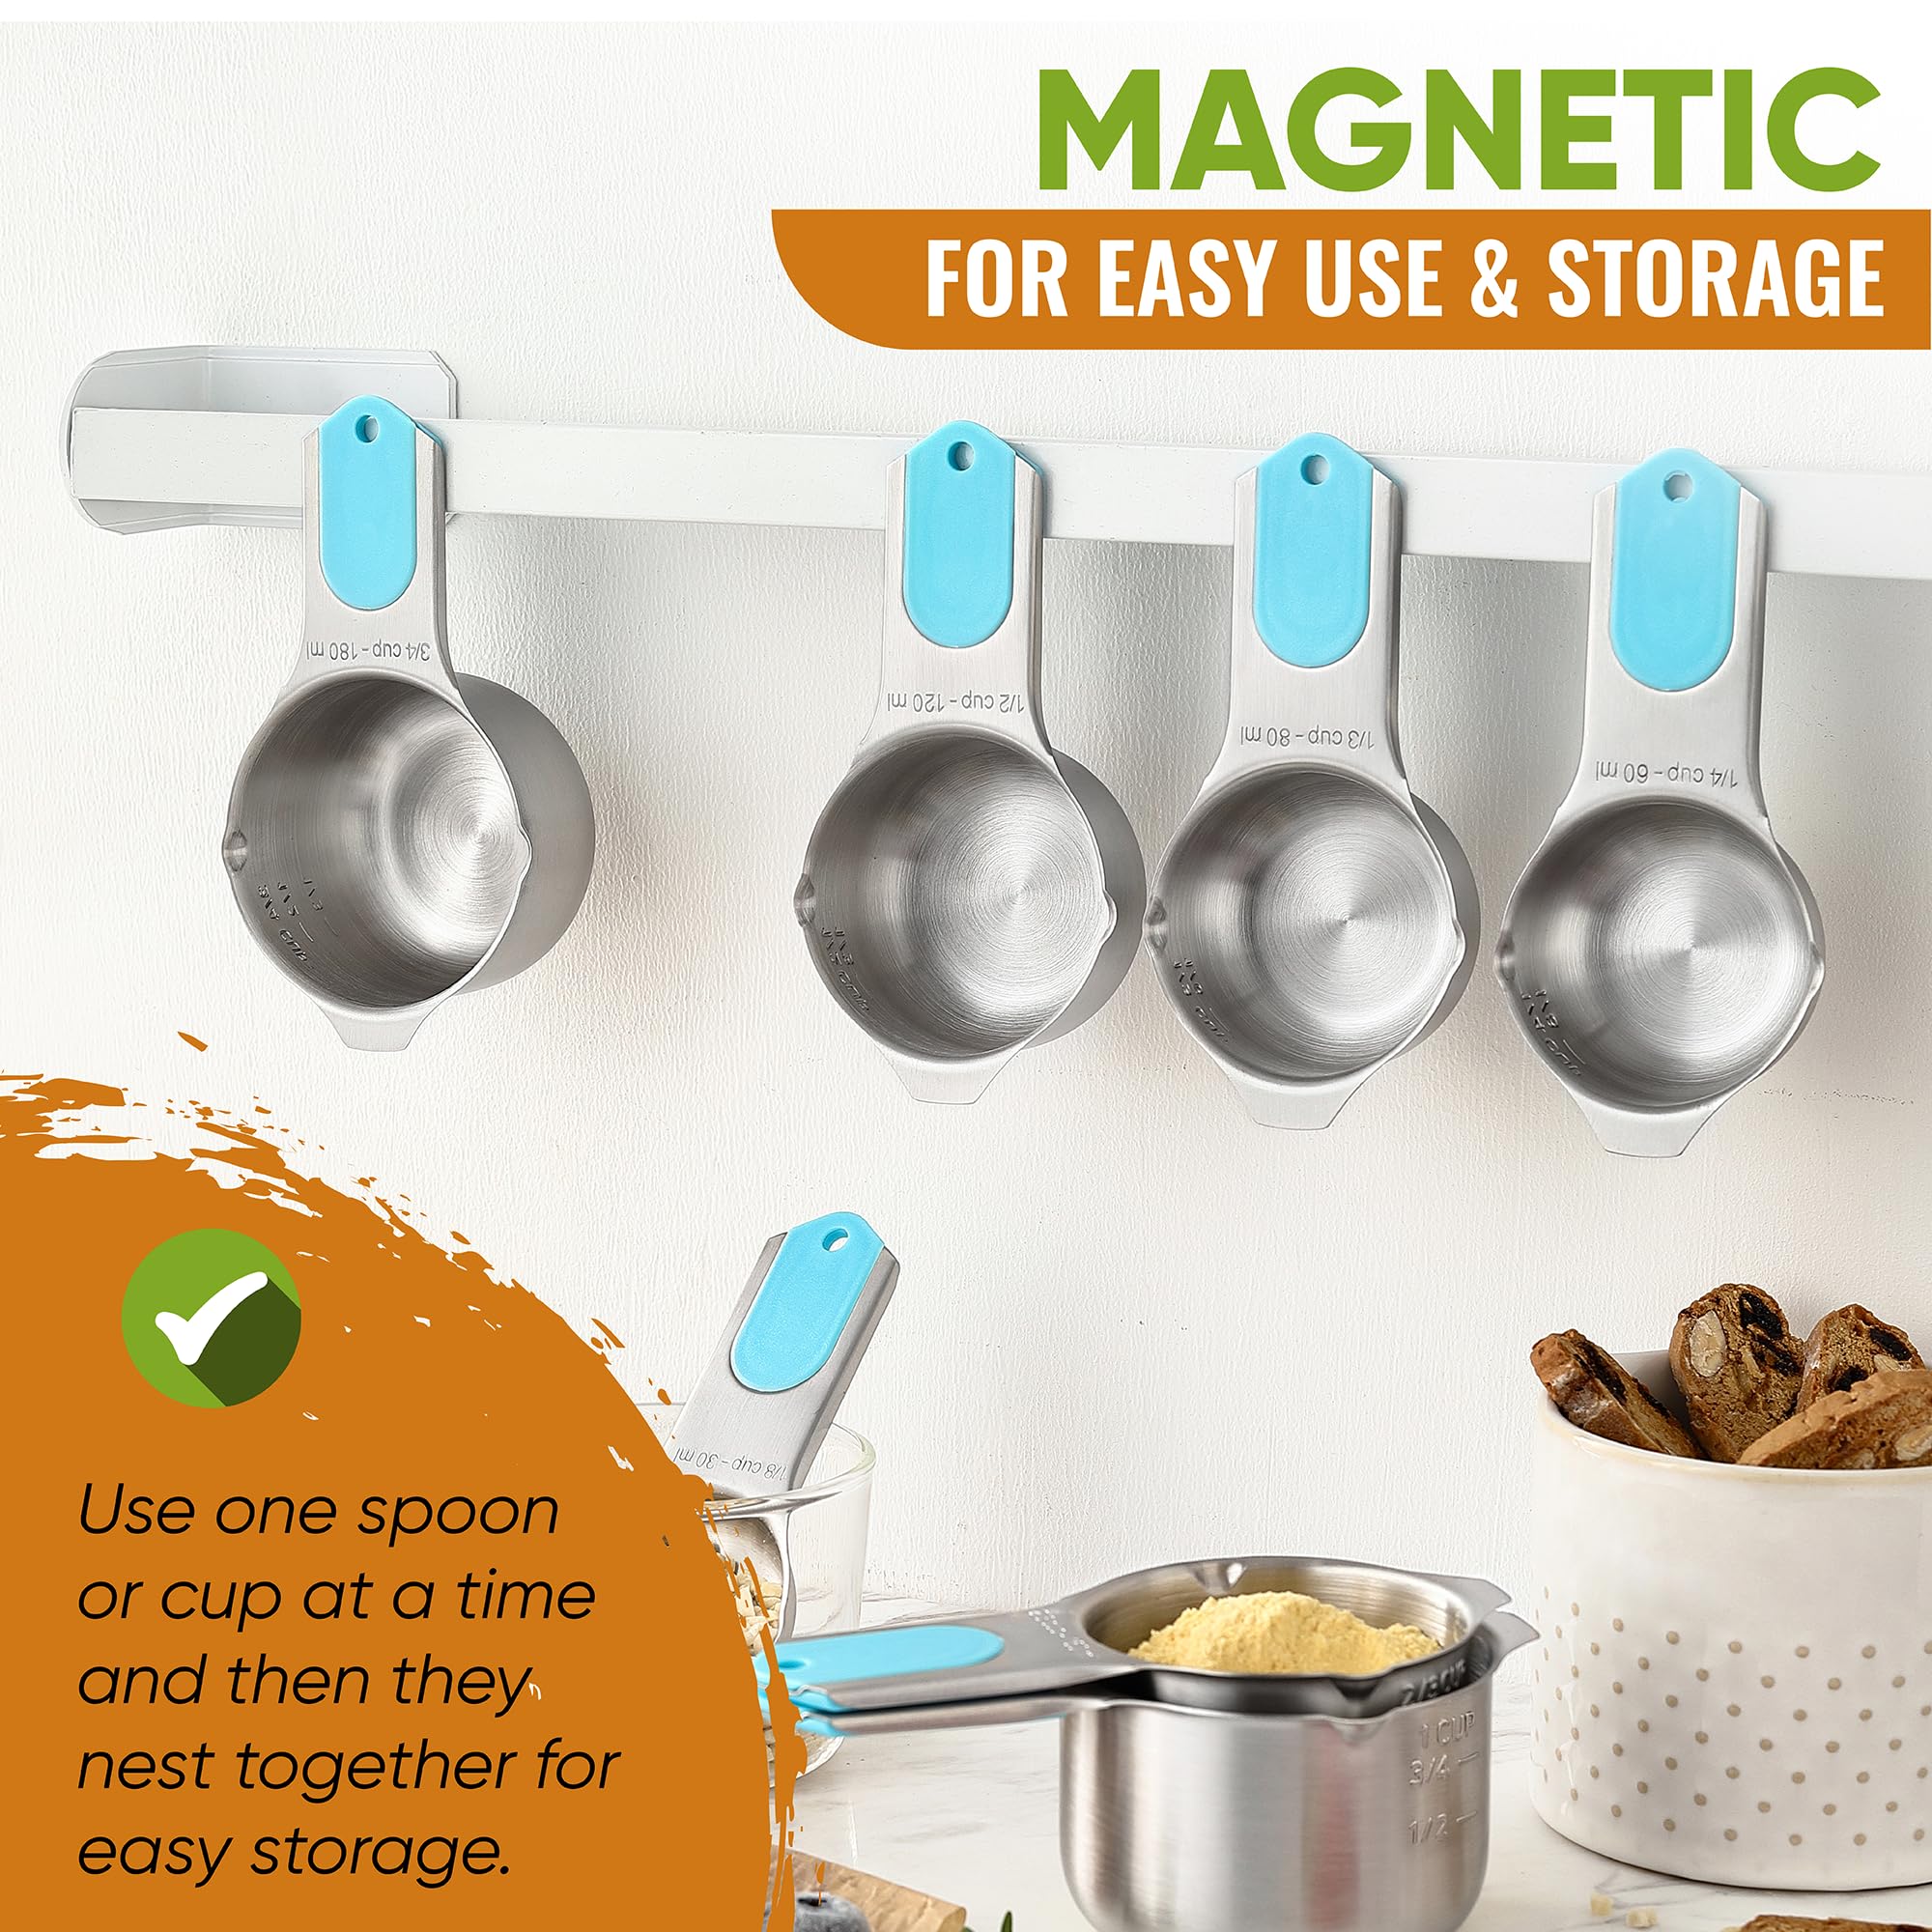 Spring Chef Magnetic Measuring Cups & Spoons Set (Patent Pending), Strong Magnets, Heavy Duty Stainless Steel Fits in Spice Jars for Baking & Cooking, BPA Free, Round Set of 15 with Leveler, Aqua Sky